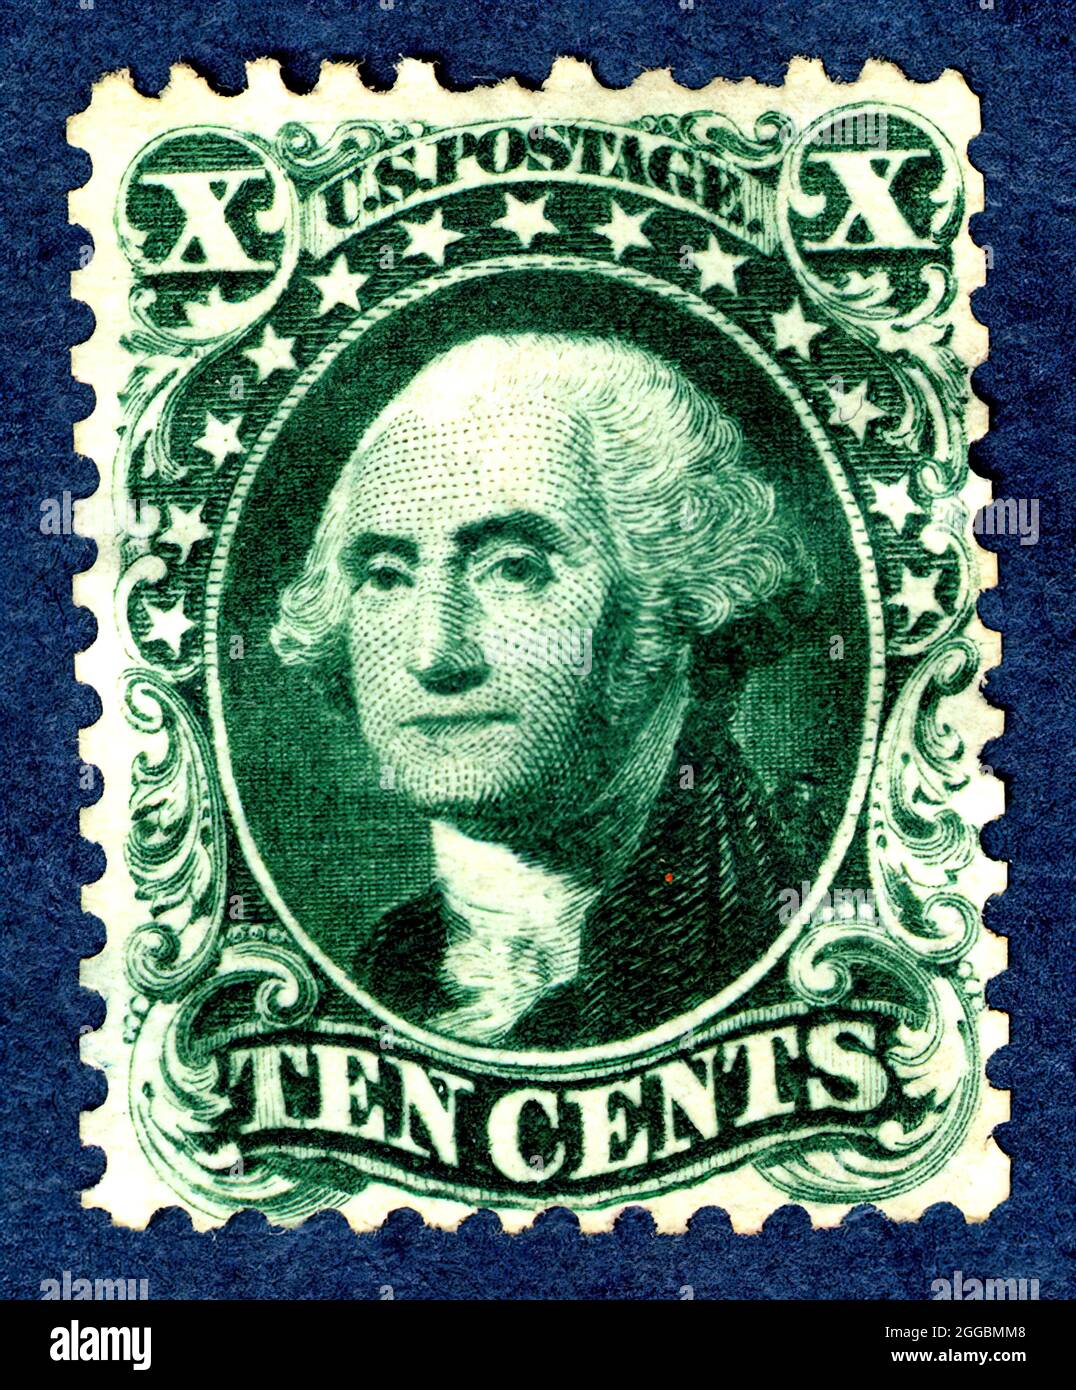 10c Washington reprint single, 1875. Unused;In 1875, Post Office Department officials decided to exhibit samples of all previously issued stamps at the Centennial Exposition in Philadelphia the following year. Since this required a special printing, the department ordered extra copies for sale to stamp collectors. Stock Photo